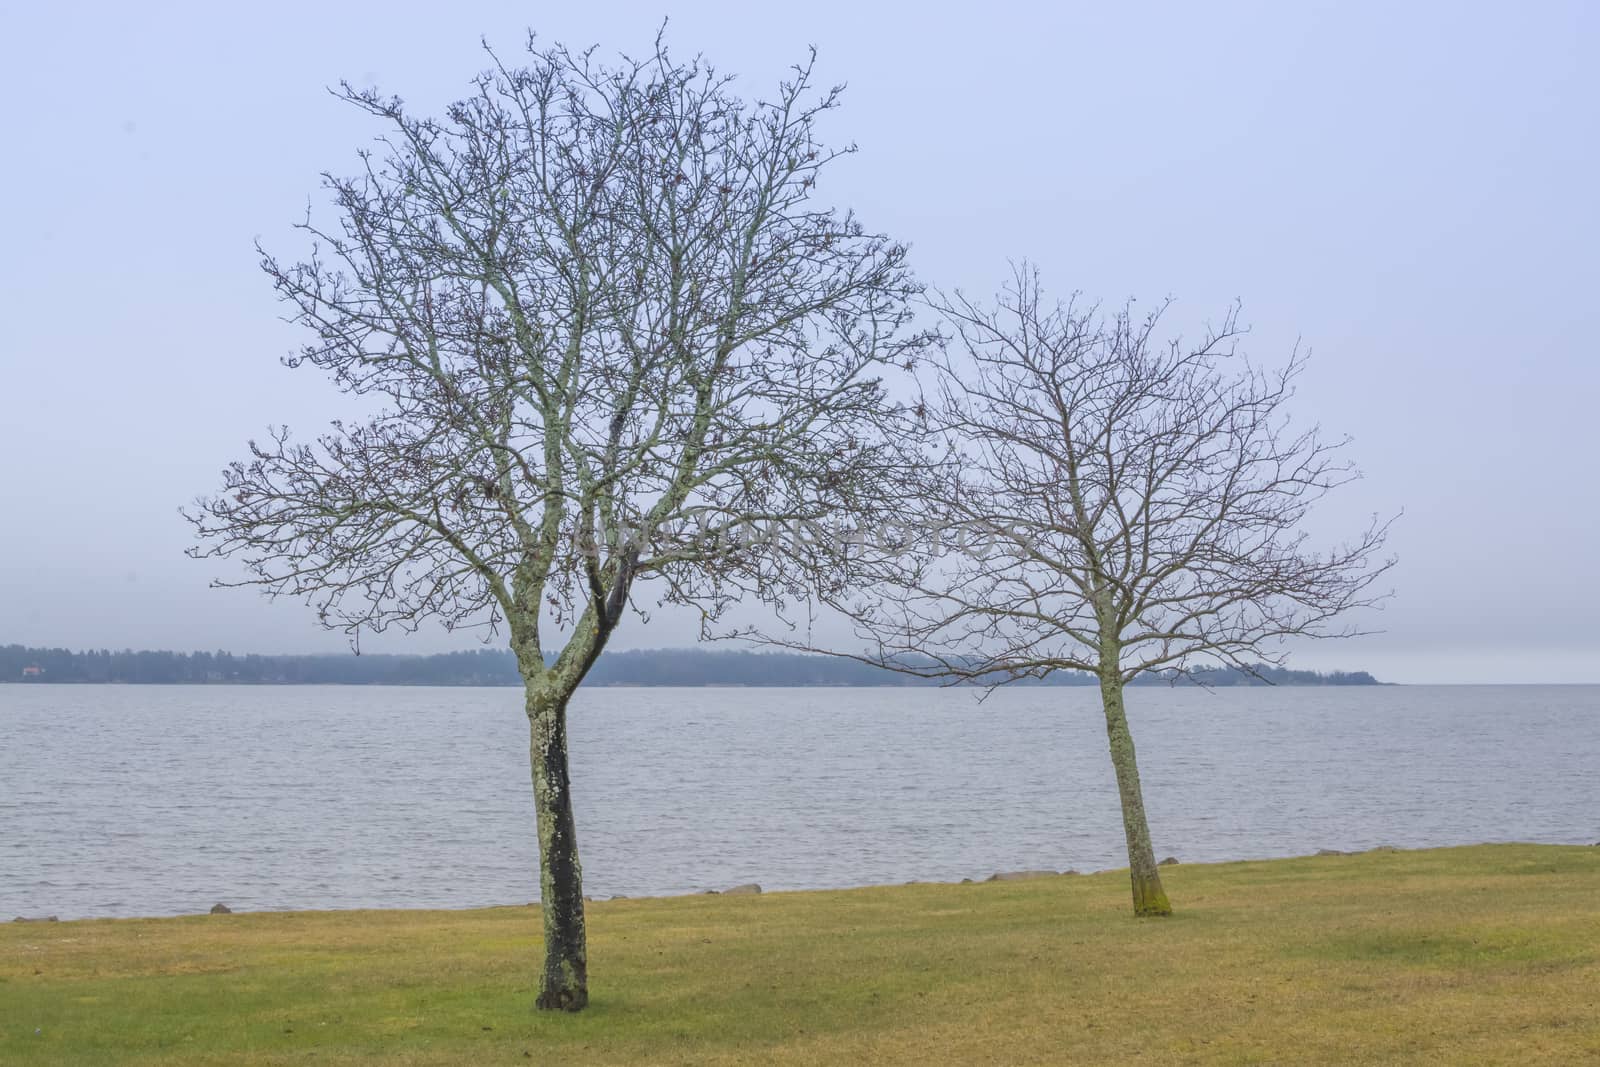 Two trees by Lake Vanern in Amal, Varmland, Sweden in March.